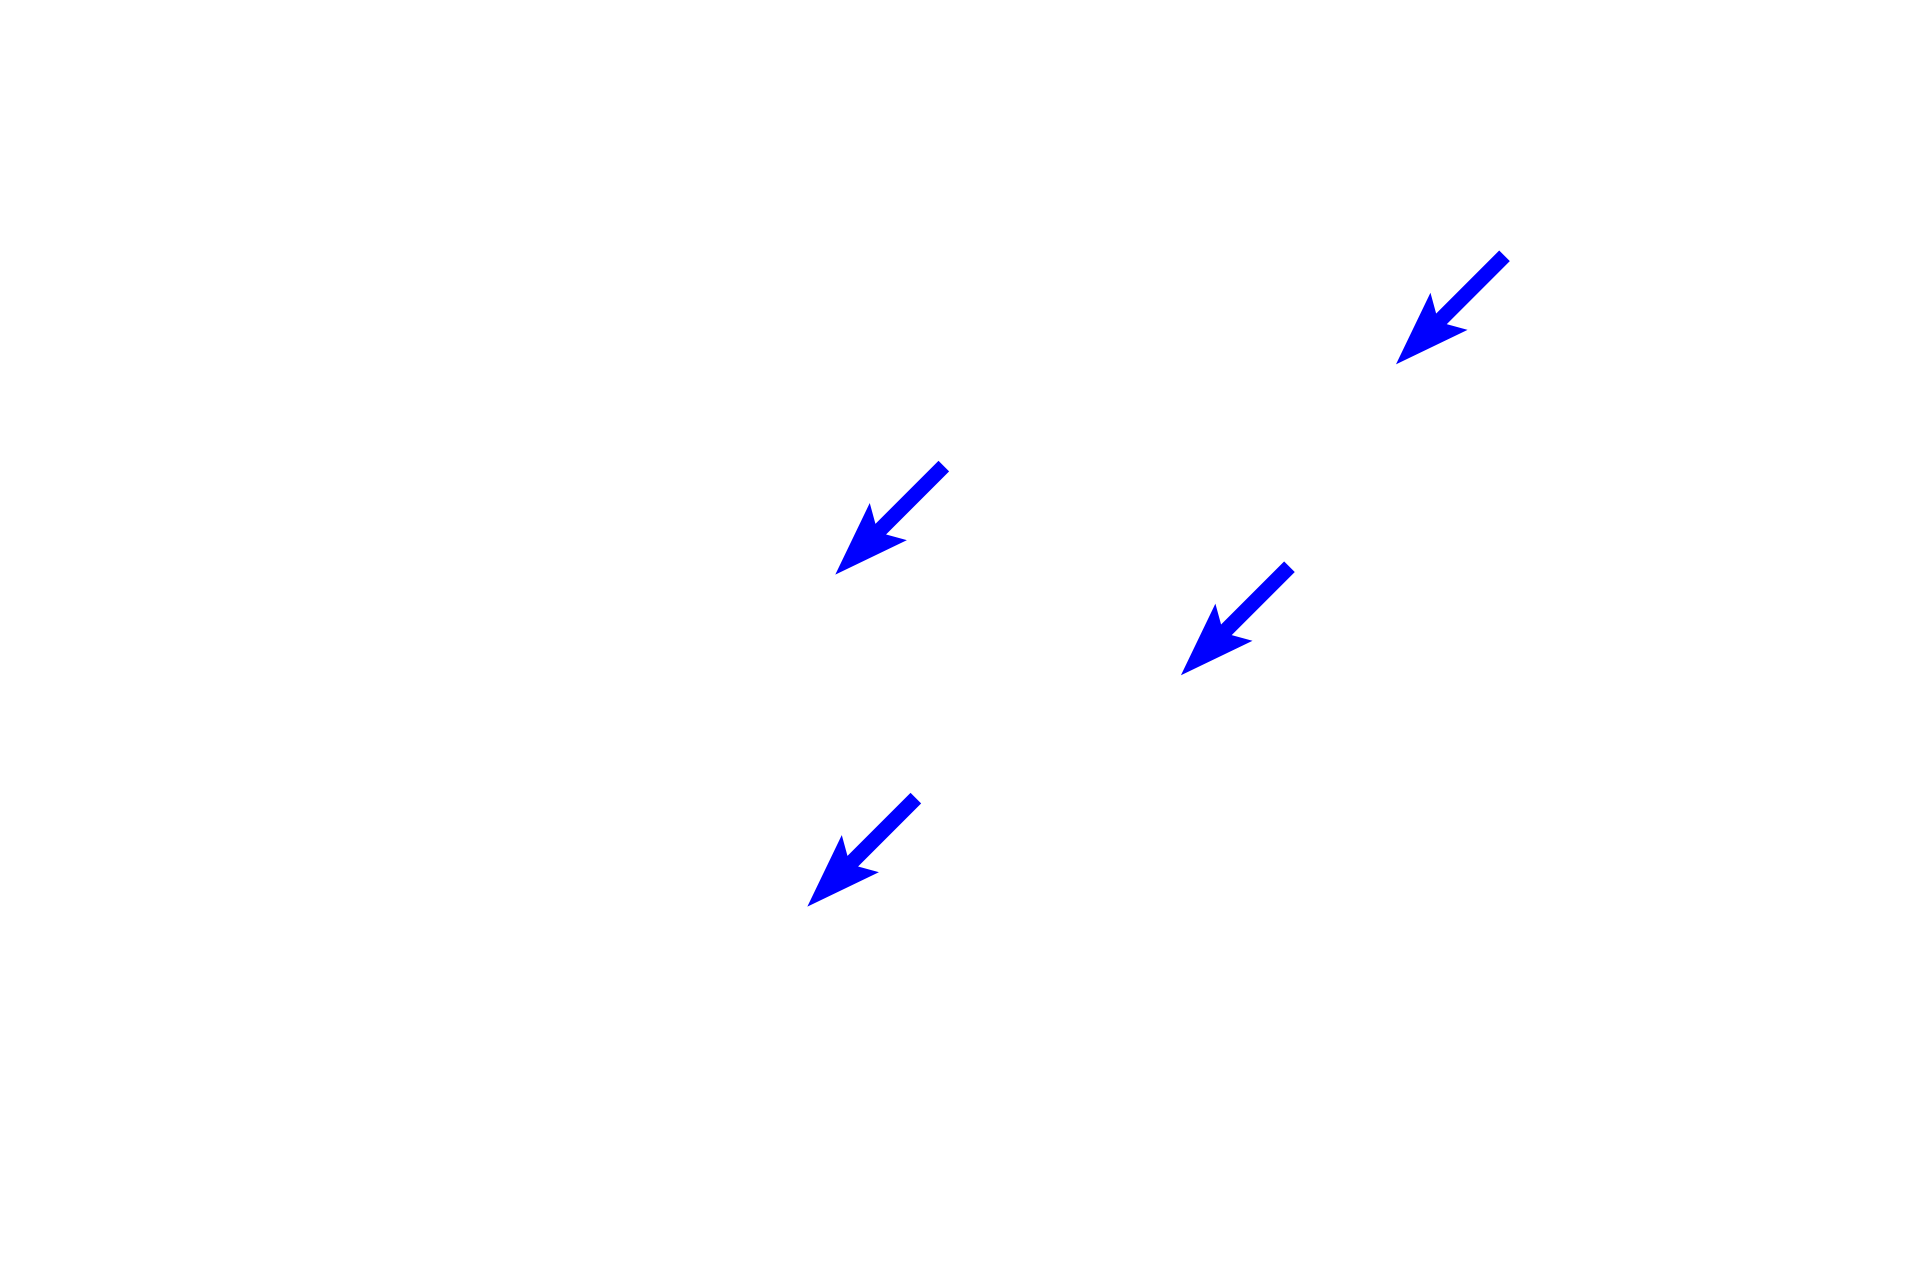 Neuronal cell bodies <p>A dendrite originates in the organ of Corti and extends to a bipolar, neuronal cell body located in this spiral ganglion.  From the opposite pole of the cell body, an axon emerges which will join other axons to form the cochlear division of cranial nerve VIII.  Ensheathing Schwann cells can also be seen accompanying both processes.  400x</p>
